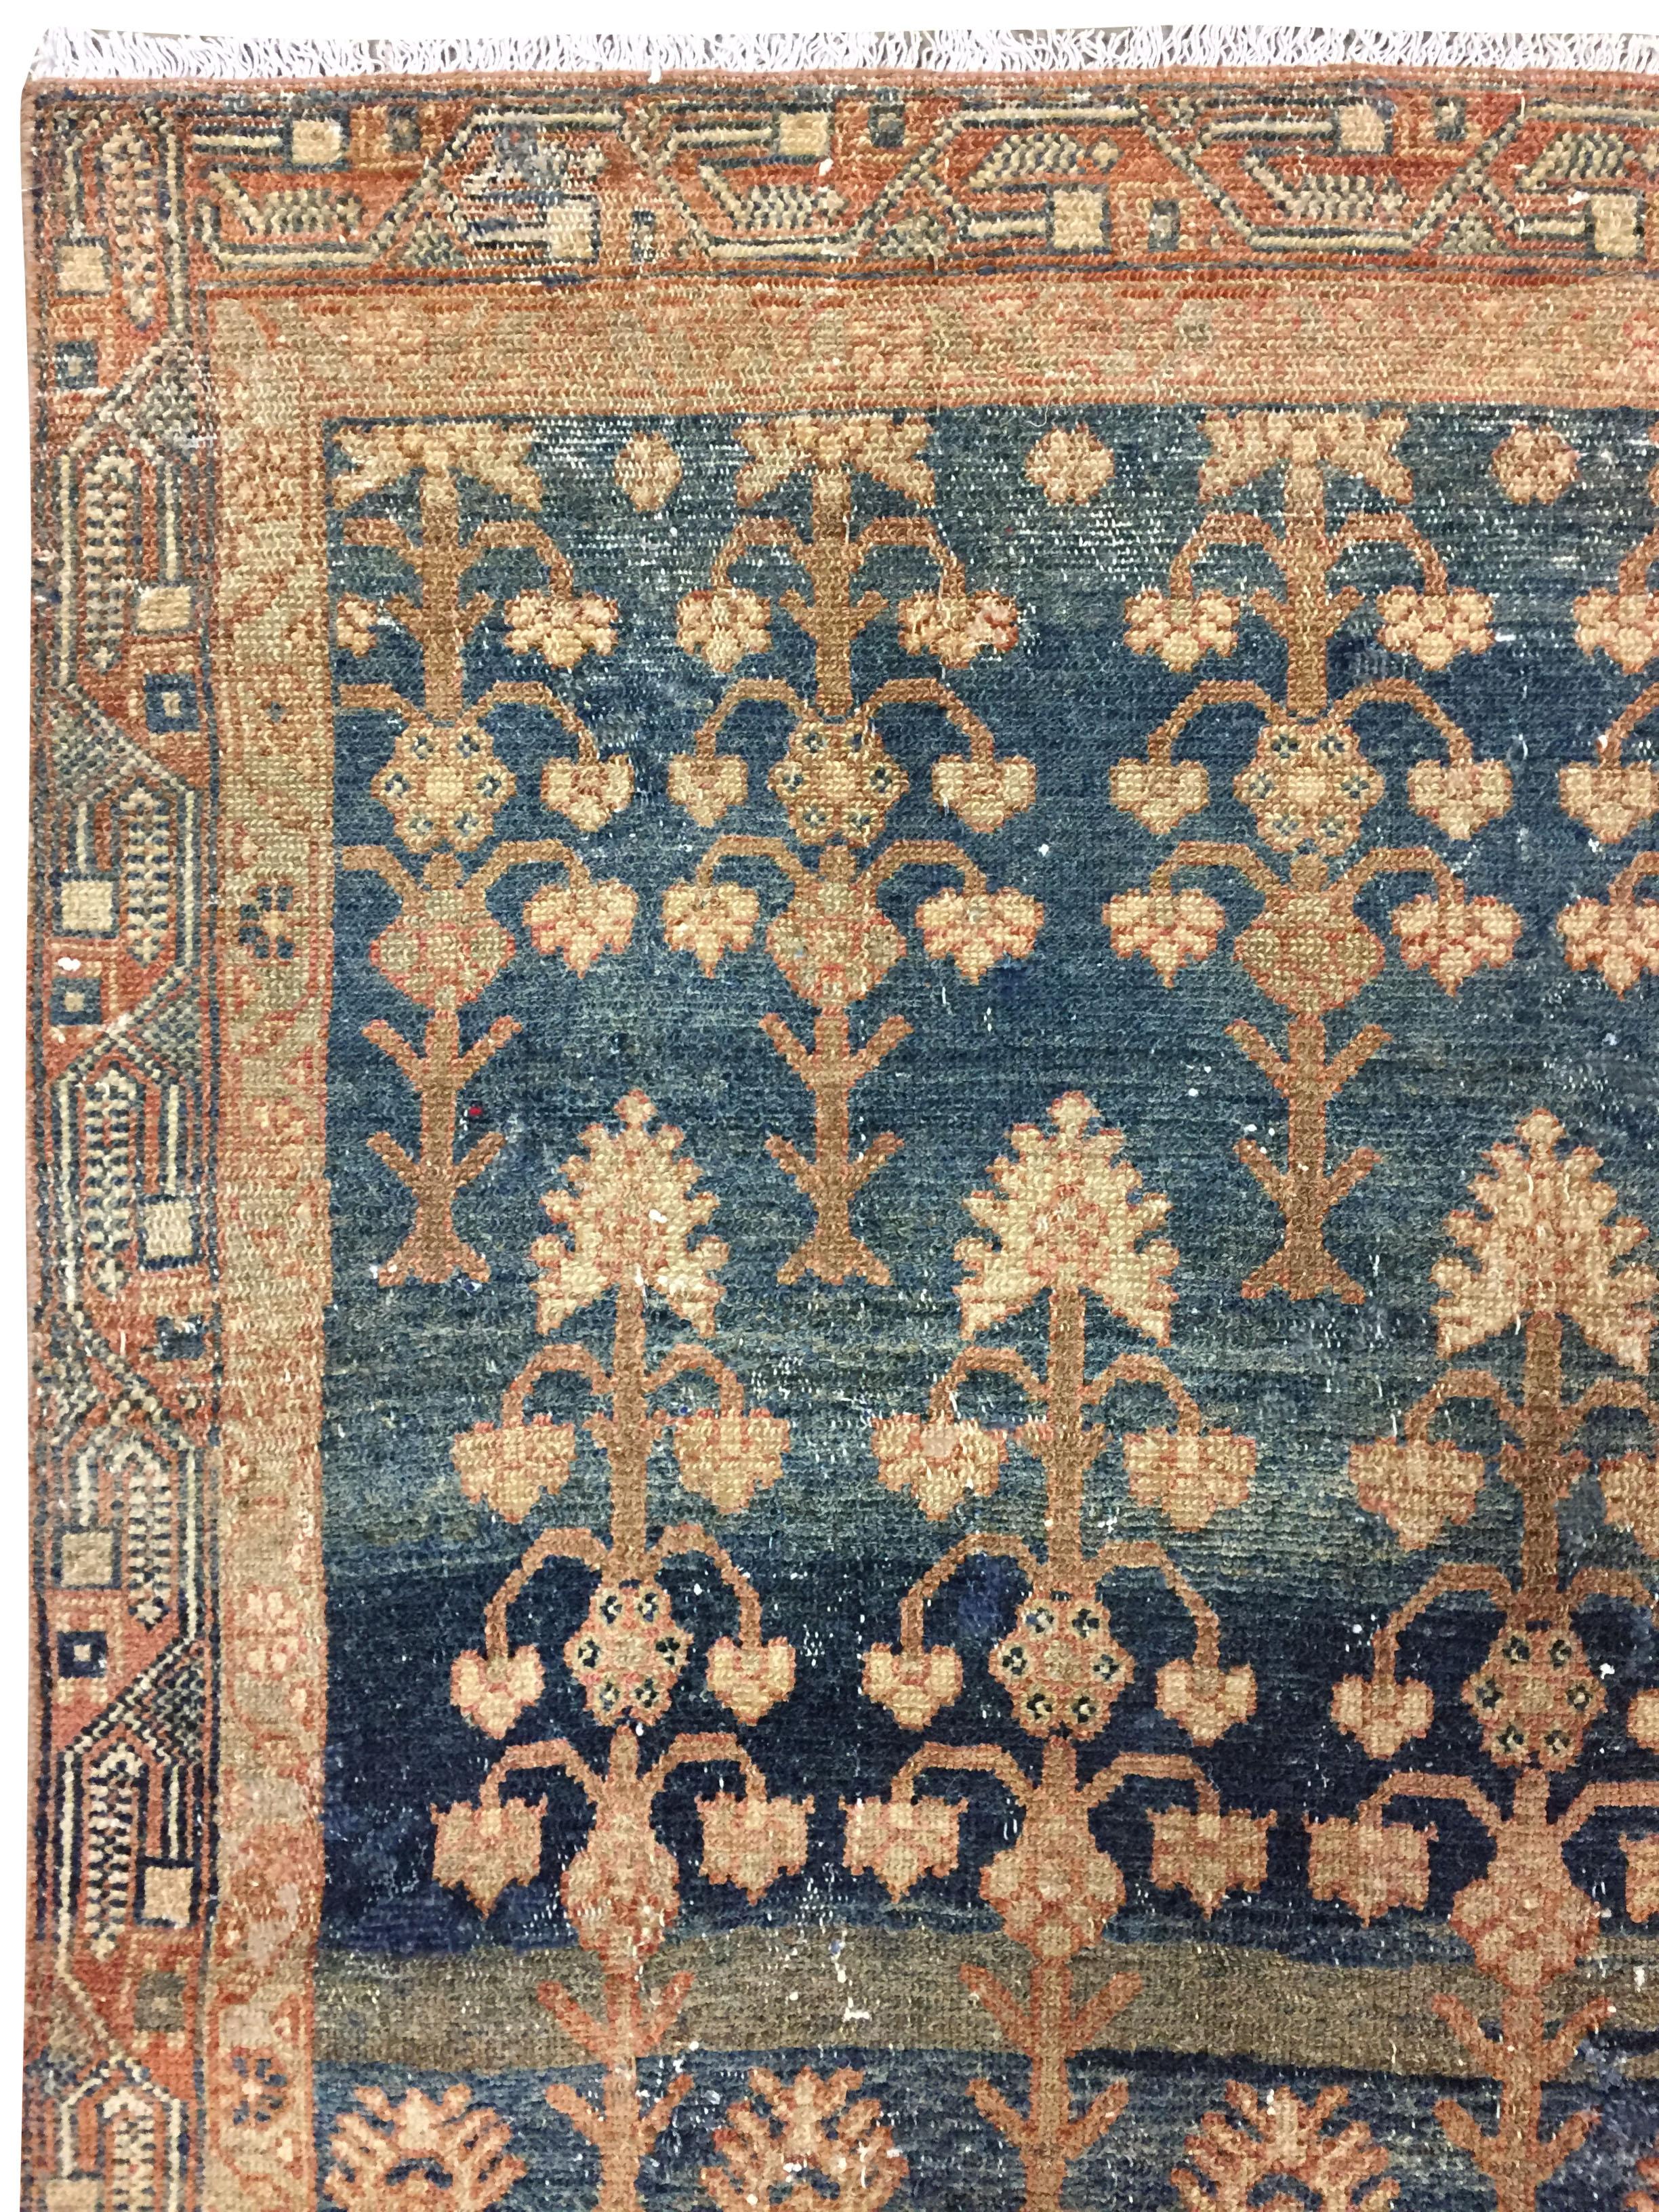 Antique slightly distressed Persian Malayer rug, Size: 4' x 5'5. A lovely antique Malayer handwoven rug with blues and an abrash in soft gray. Abrash is a natural change in color that occurs when different dyes are used in a batch of wool and gives